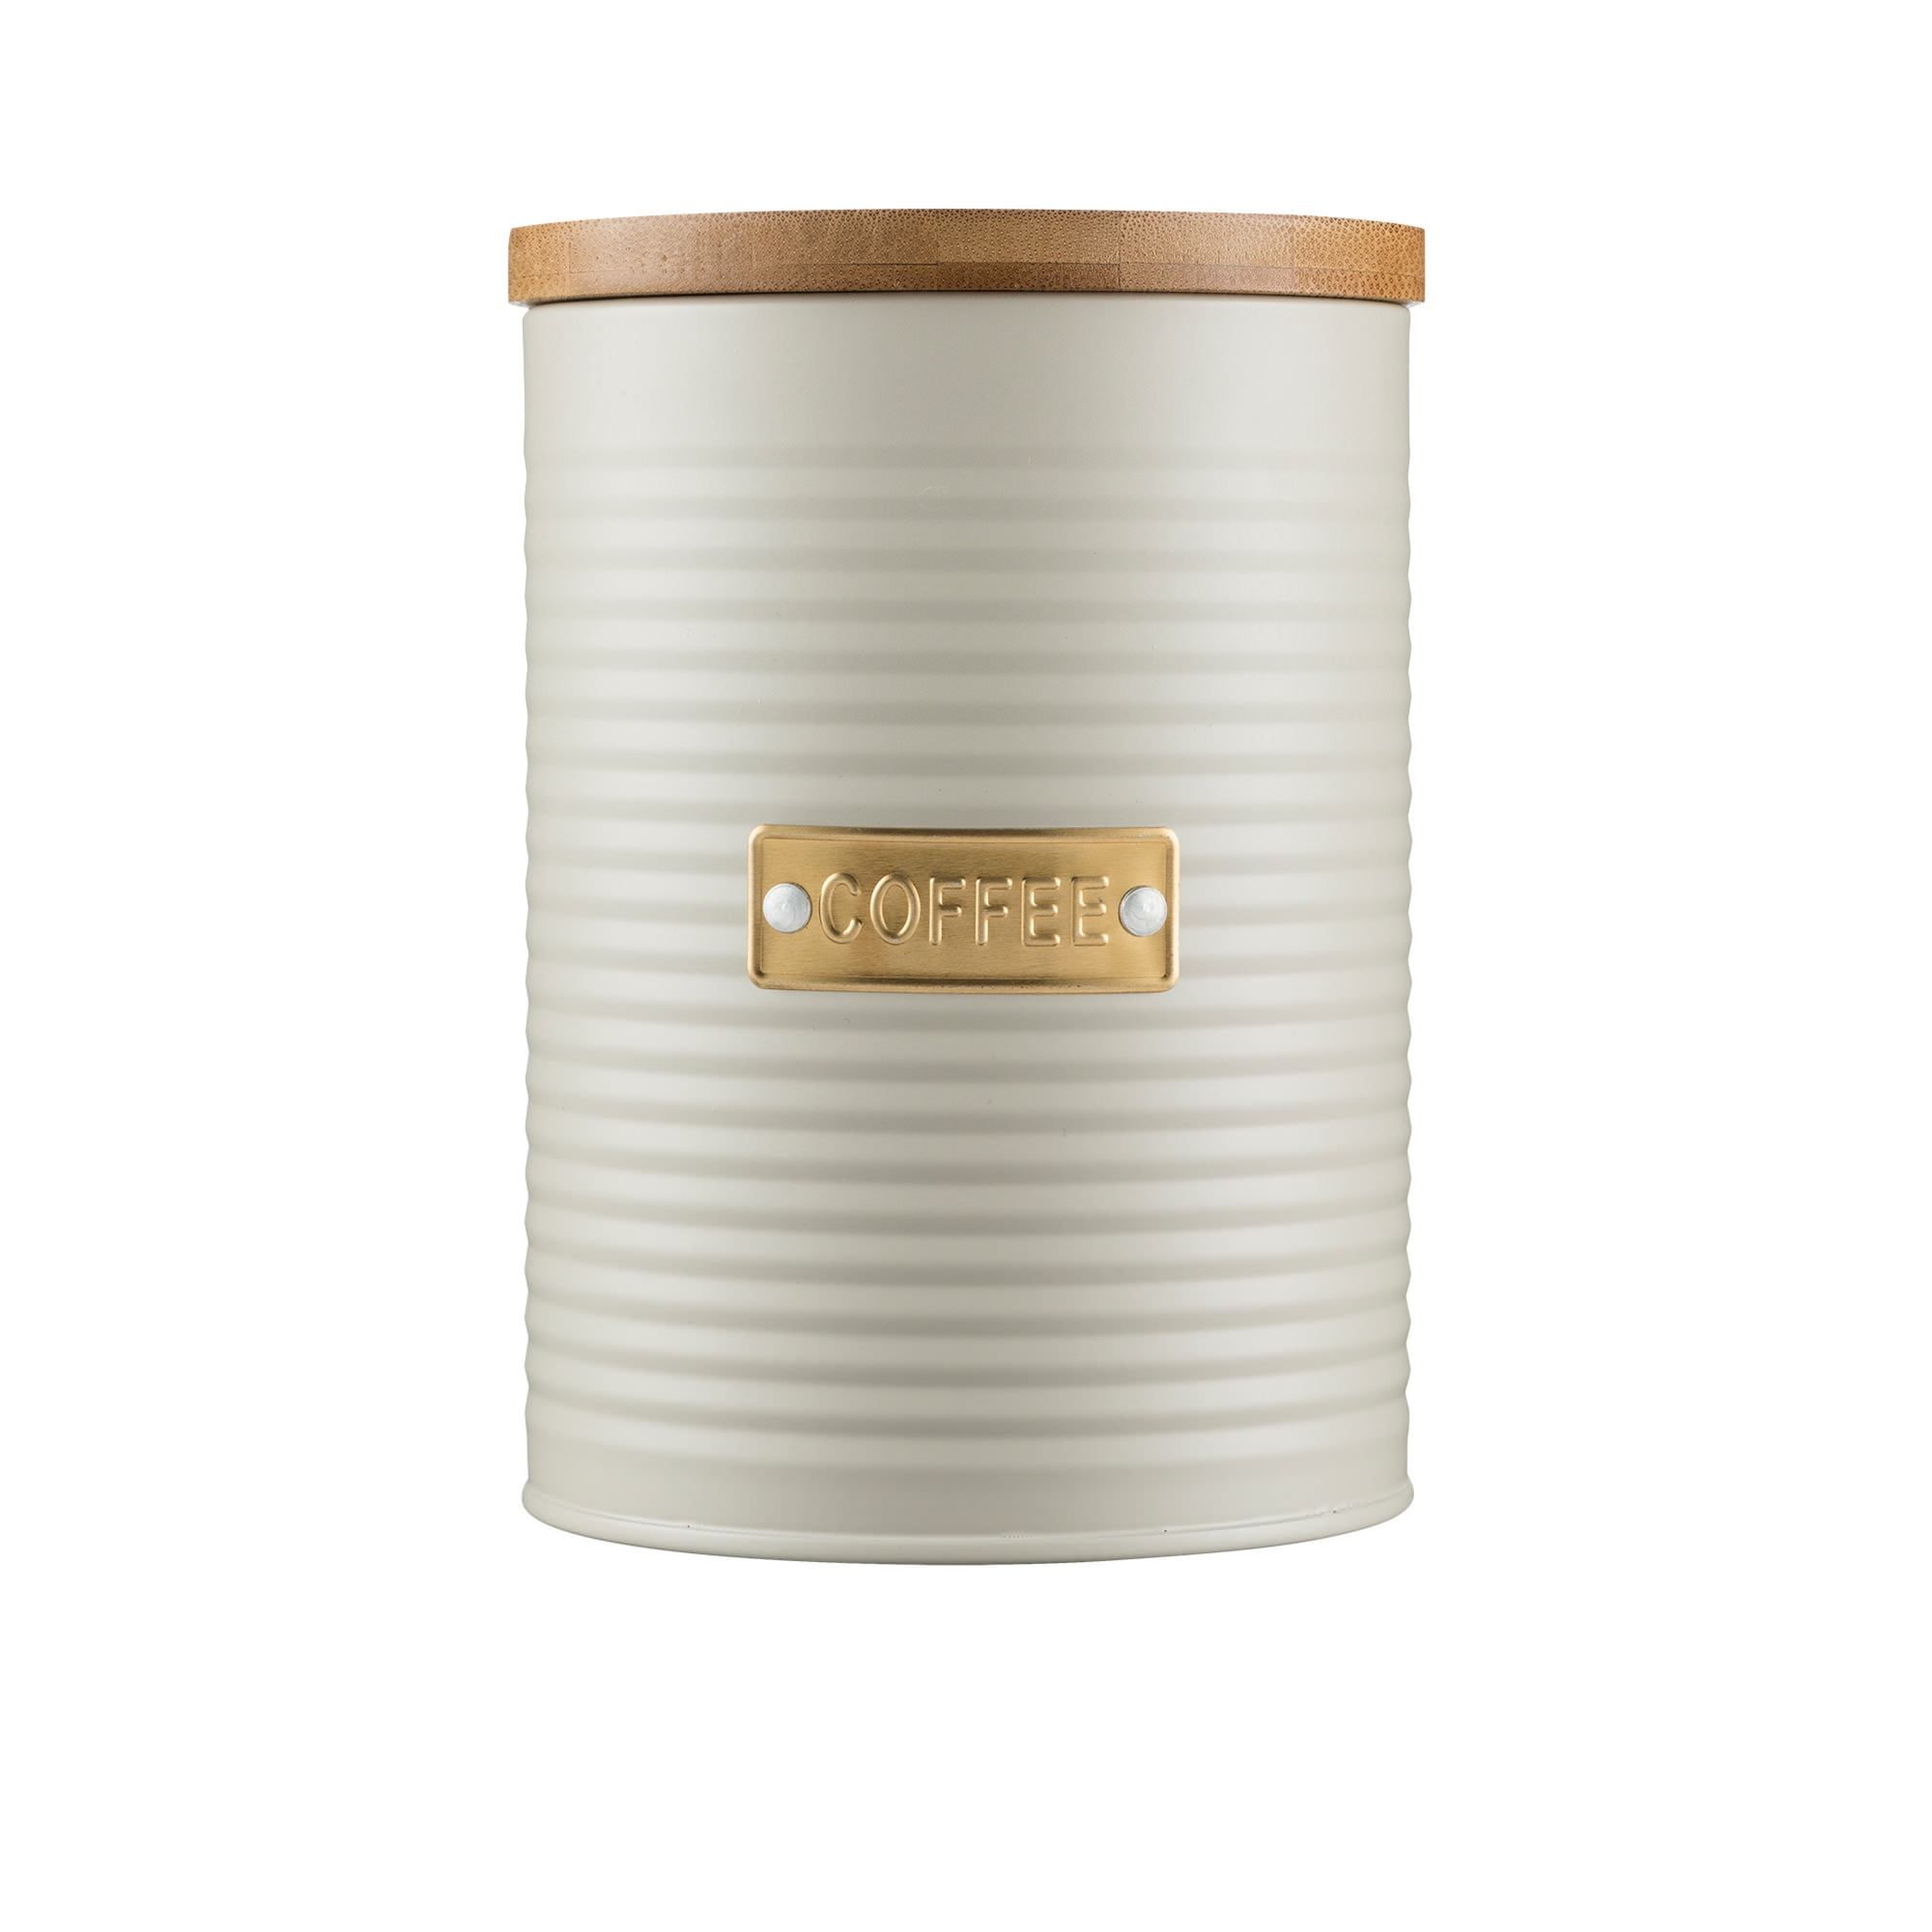 Typhoon Living Coffee Canister 1.4L Oatmeal Image 1